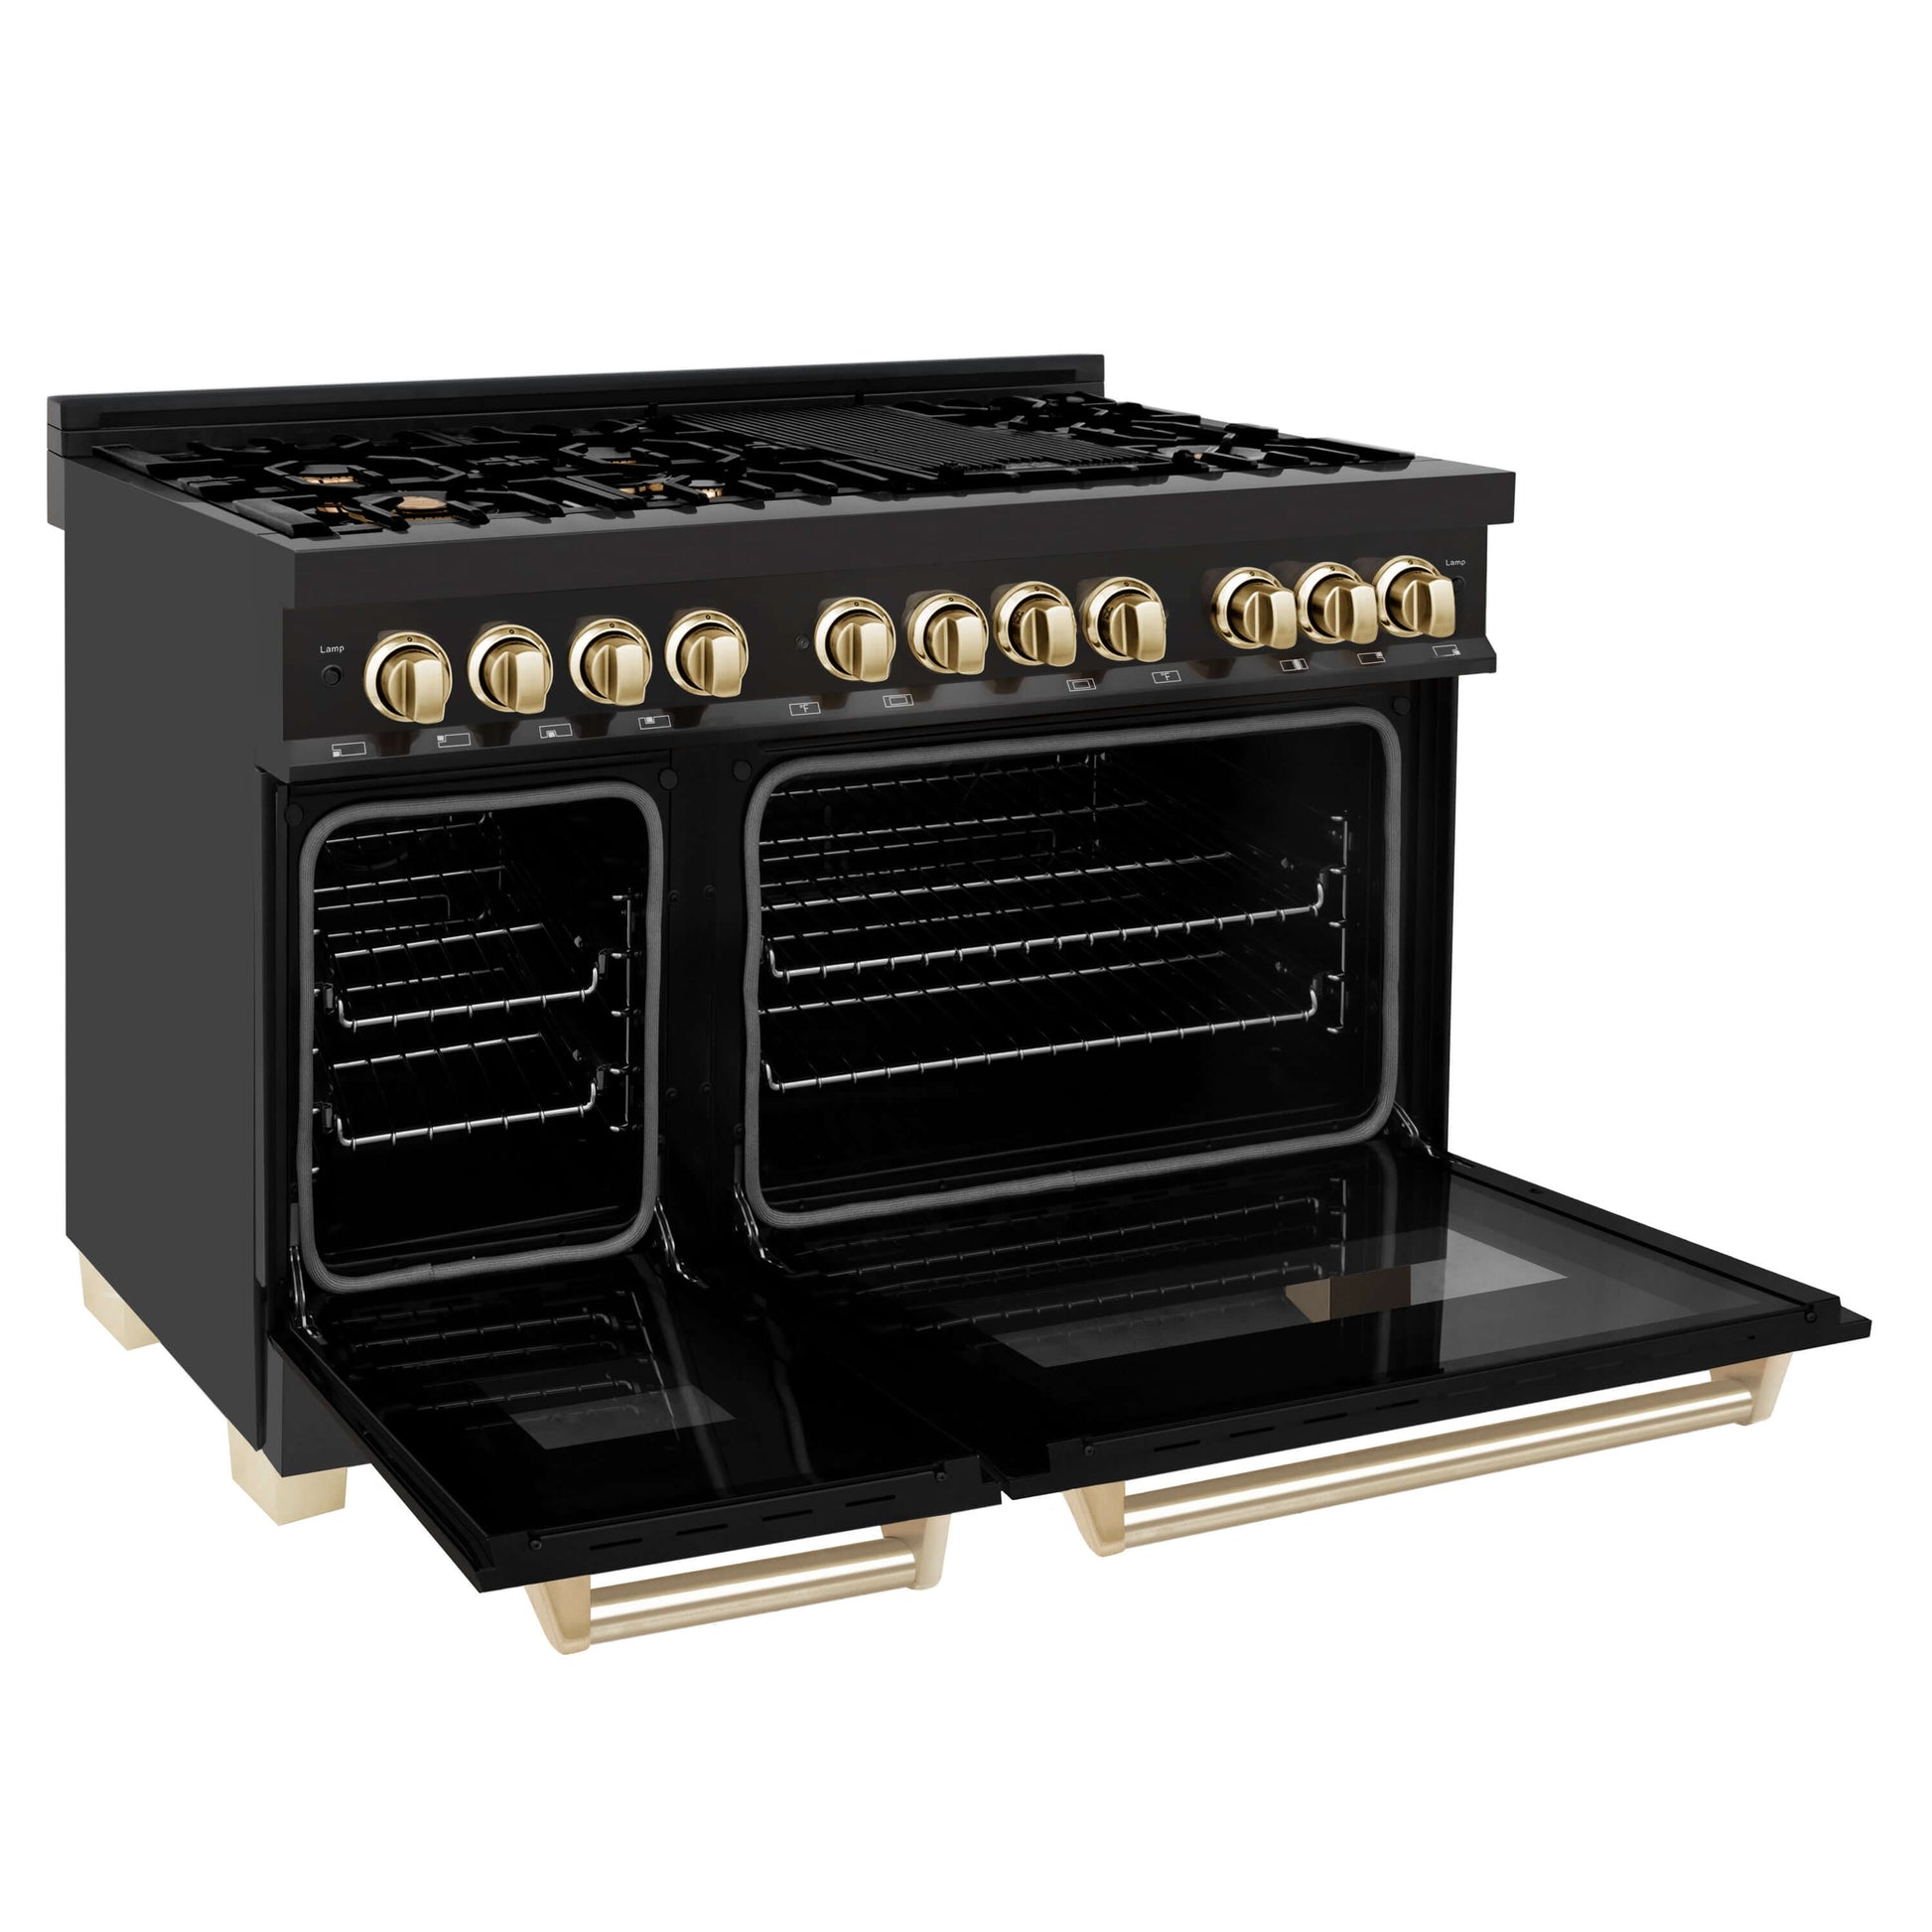 ZLINE 3-Appliance 48" Autograph Edition Kitchen Package with Black Stainless Steel Dual Fuel Range, Range Hood, and Dishwasher with Polished Gold Accents